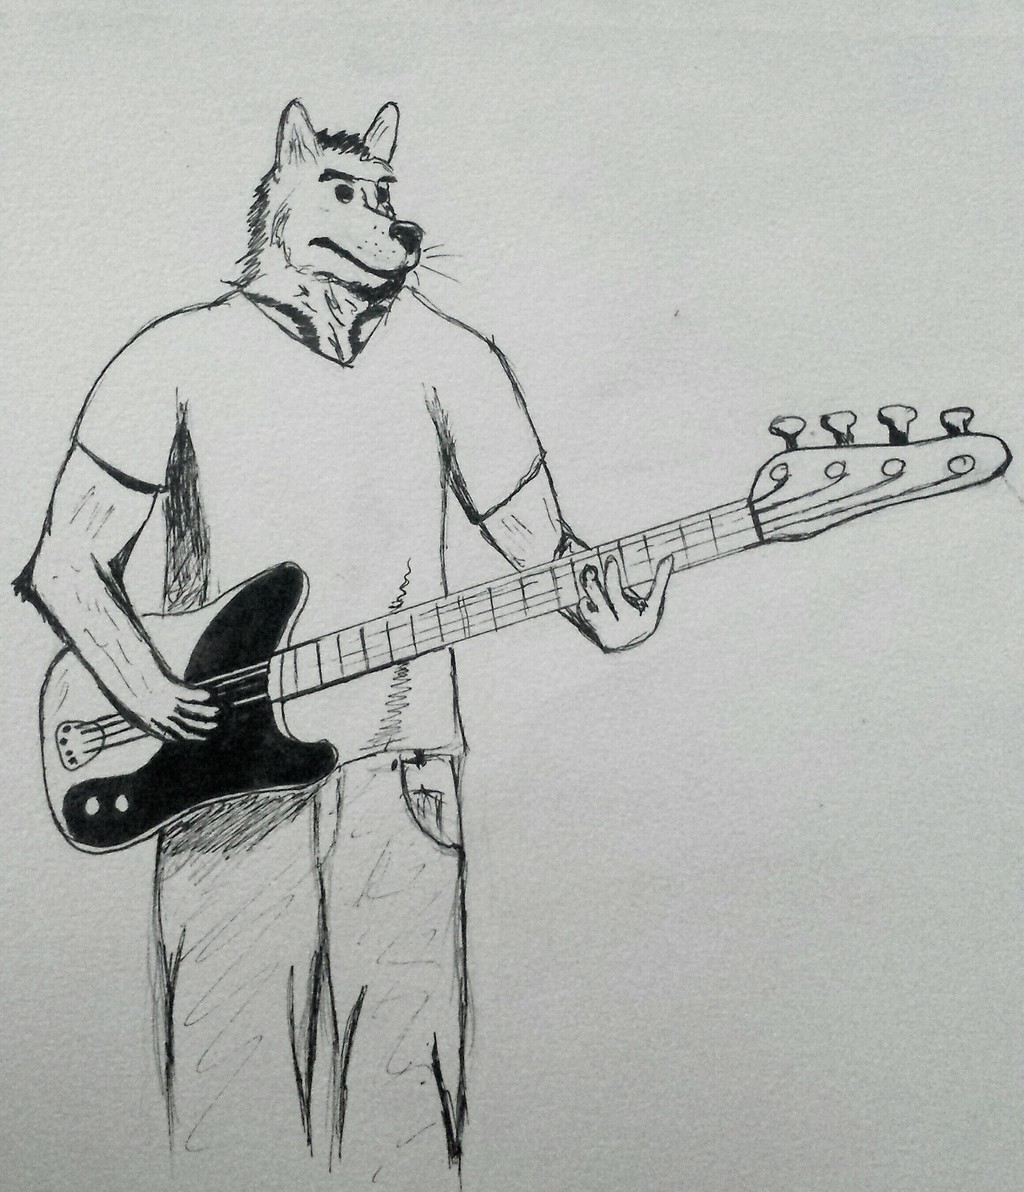 Furry Plays the Blues